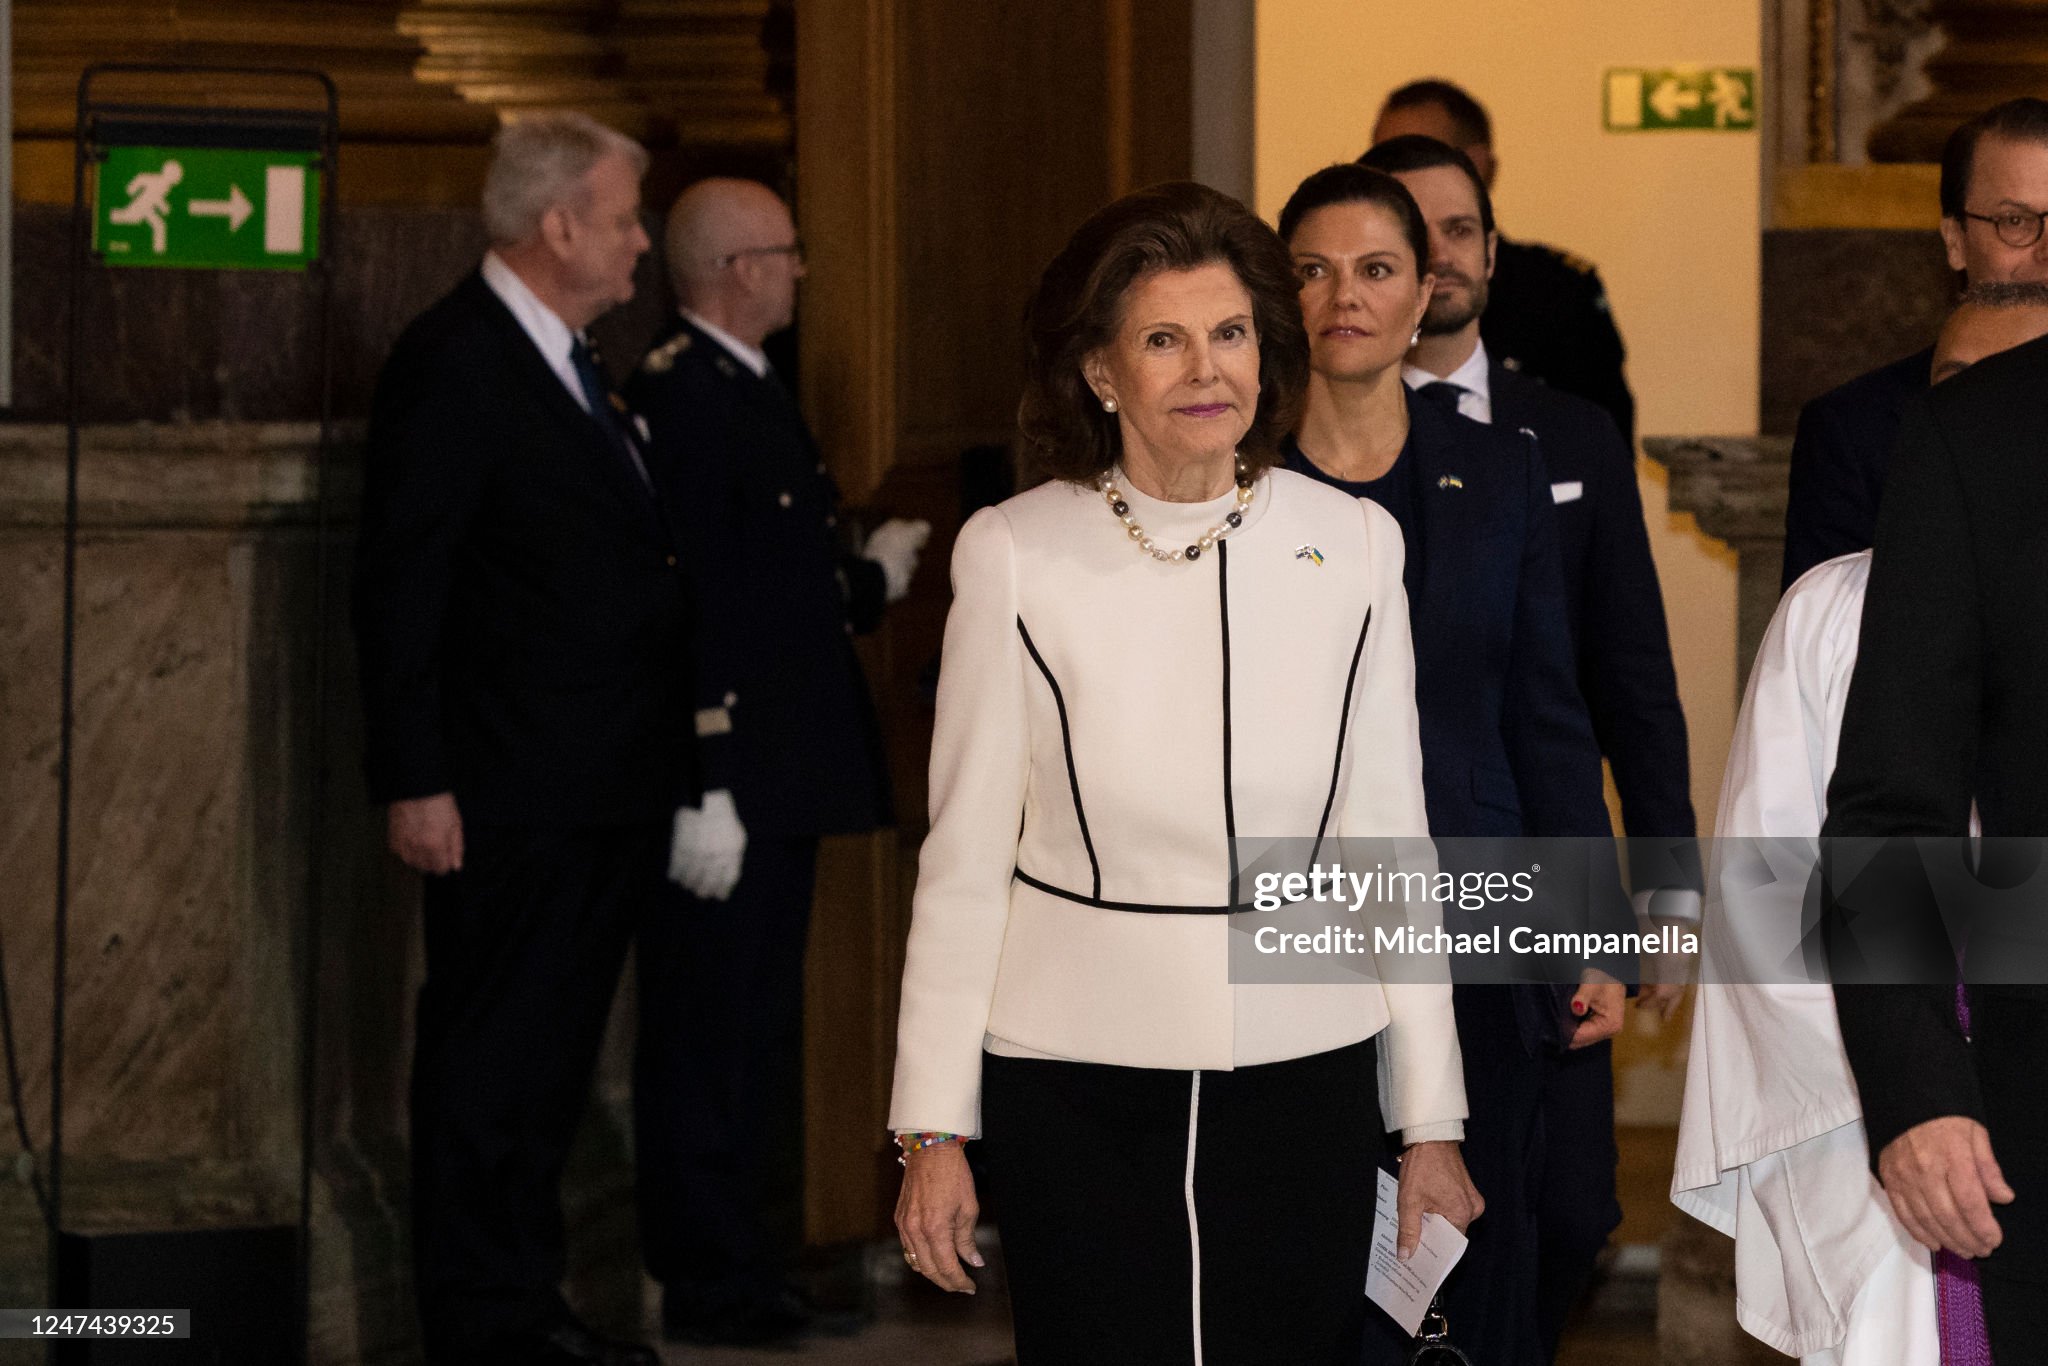 queen-silvia-and-crown-princess-victoria-of-sweden-attend-a-peace-prayer-marking-the-one-year.jpg